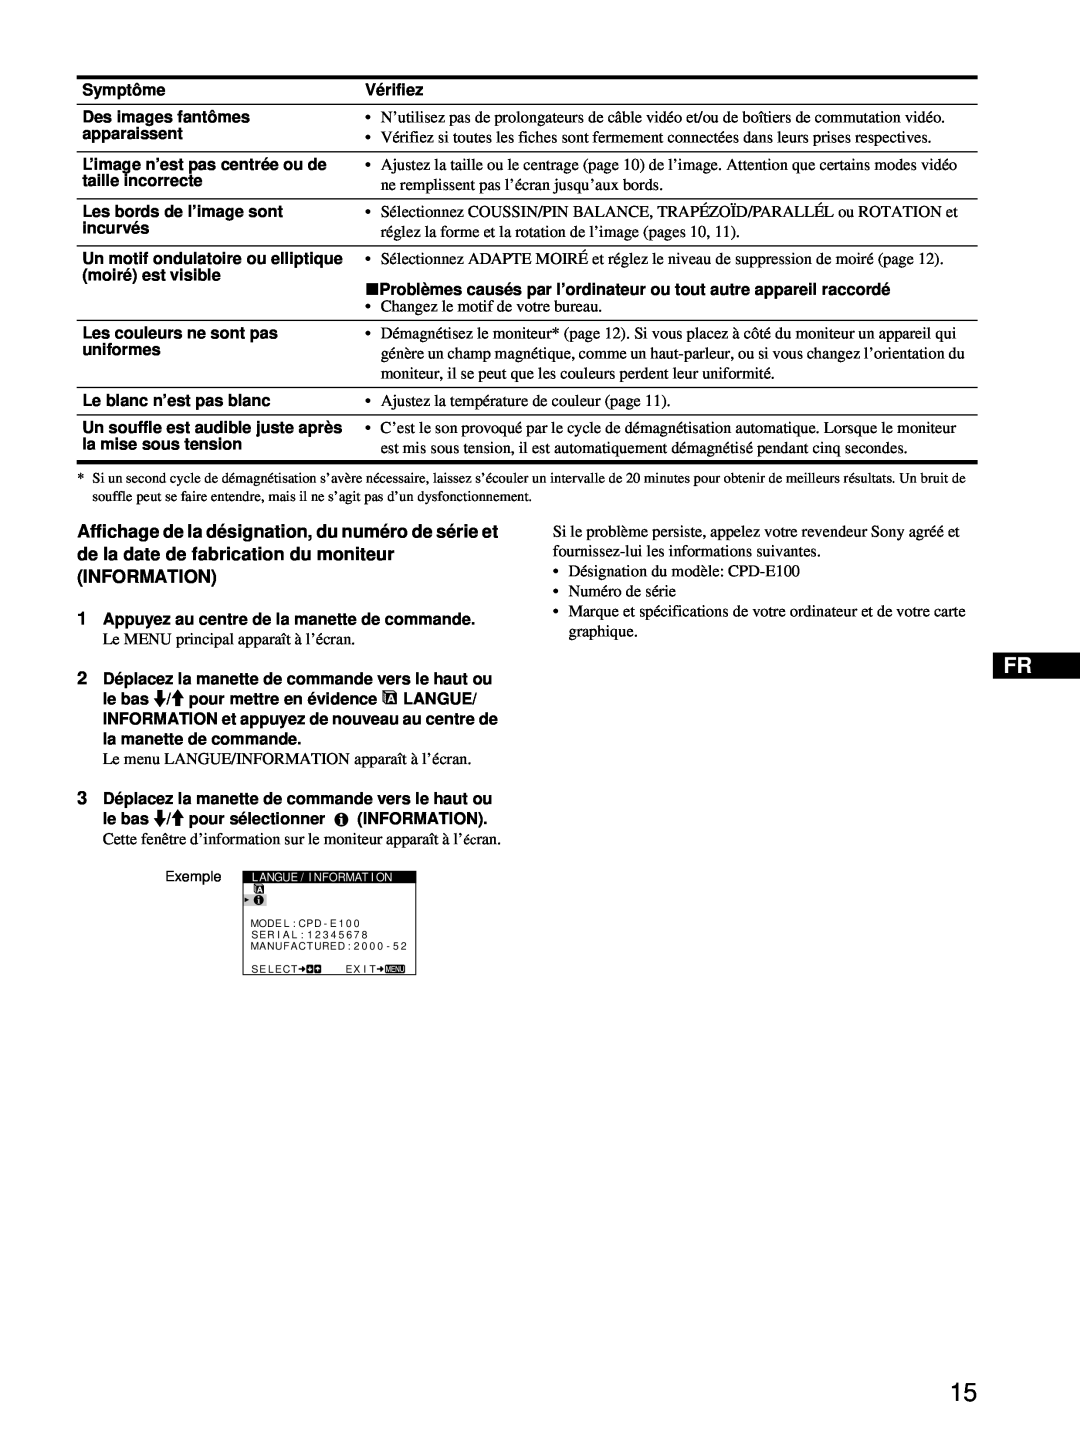 Sony CPD-E100 manual Information, Exemple 